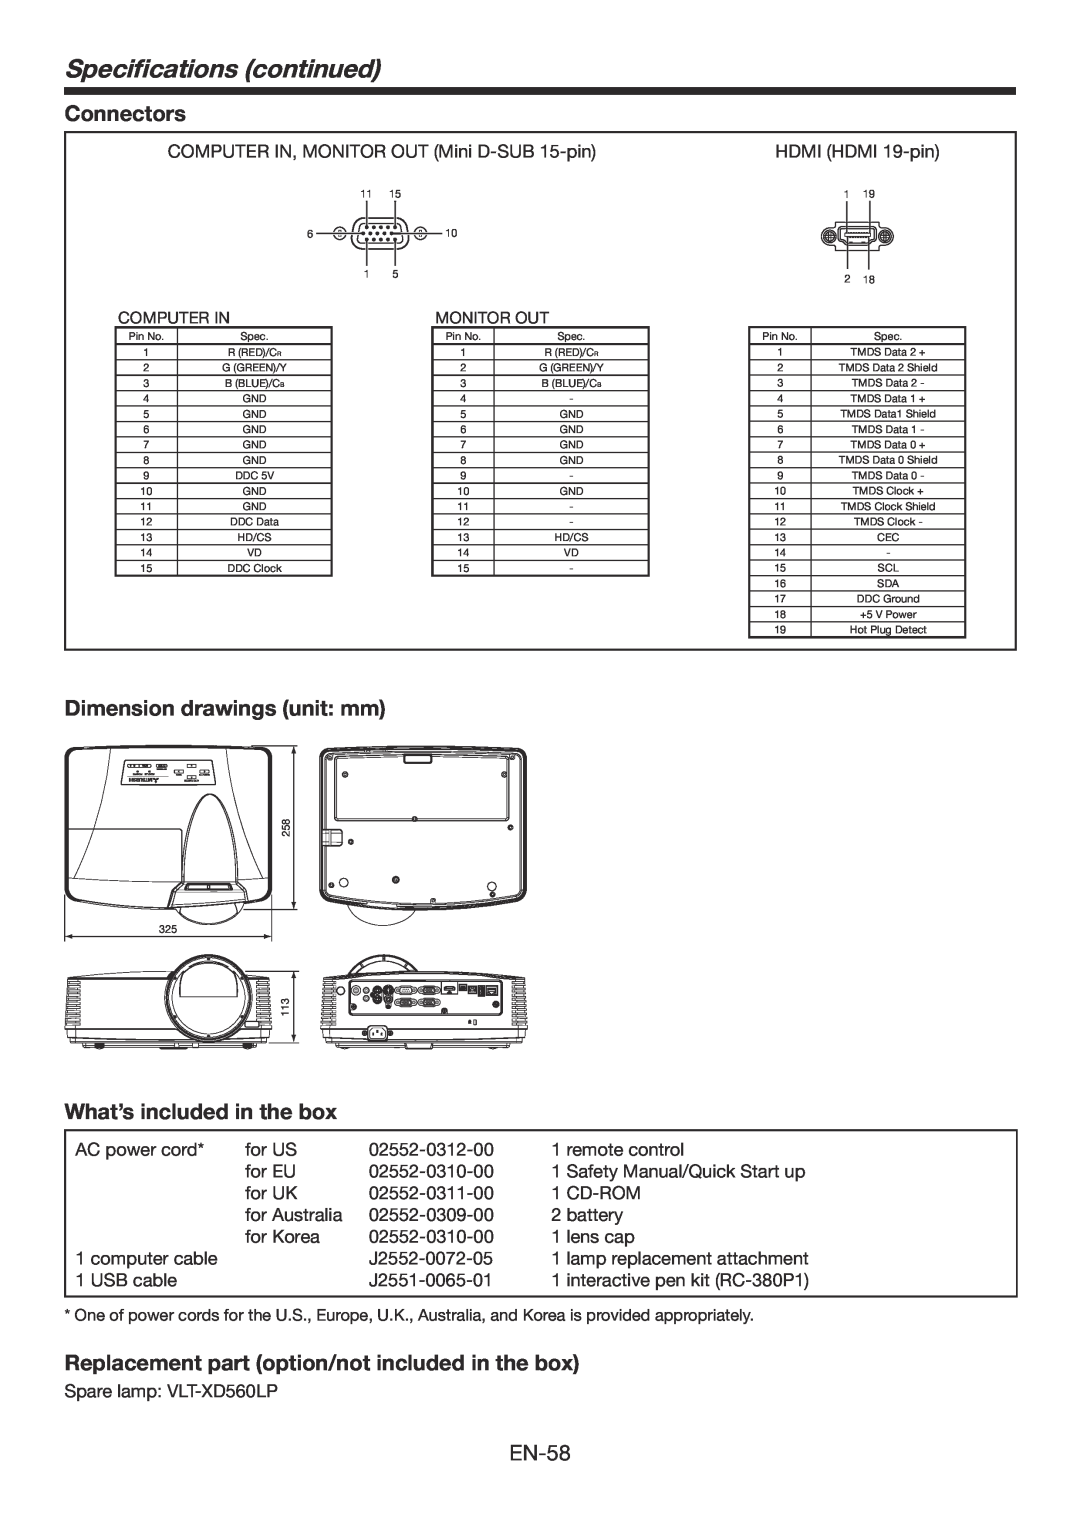 Mitsubishi Electronics WD385U-EST user manual Specifications continued, Connectors, Dimension drawings unit mm 